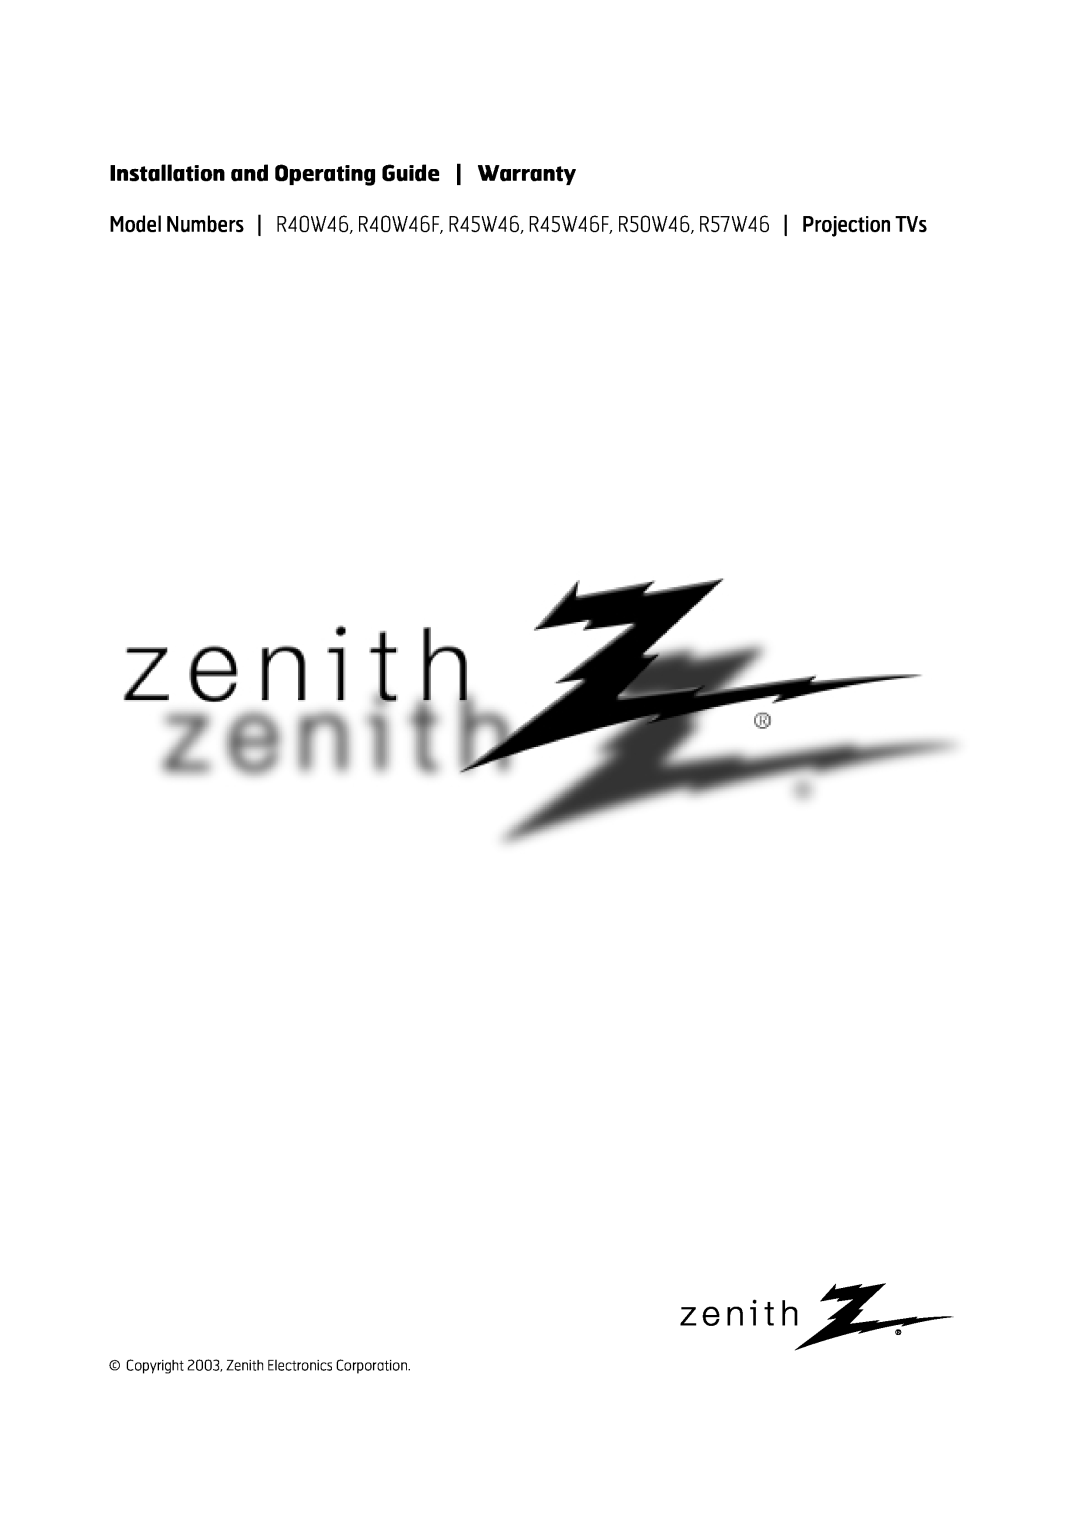 Zenith R40W46 warranty Installation and Operating Guide Warranty, Copyright 2003, Zenith Electronics Corporation 